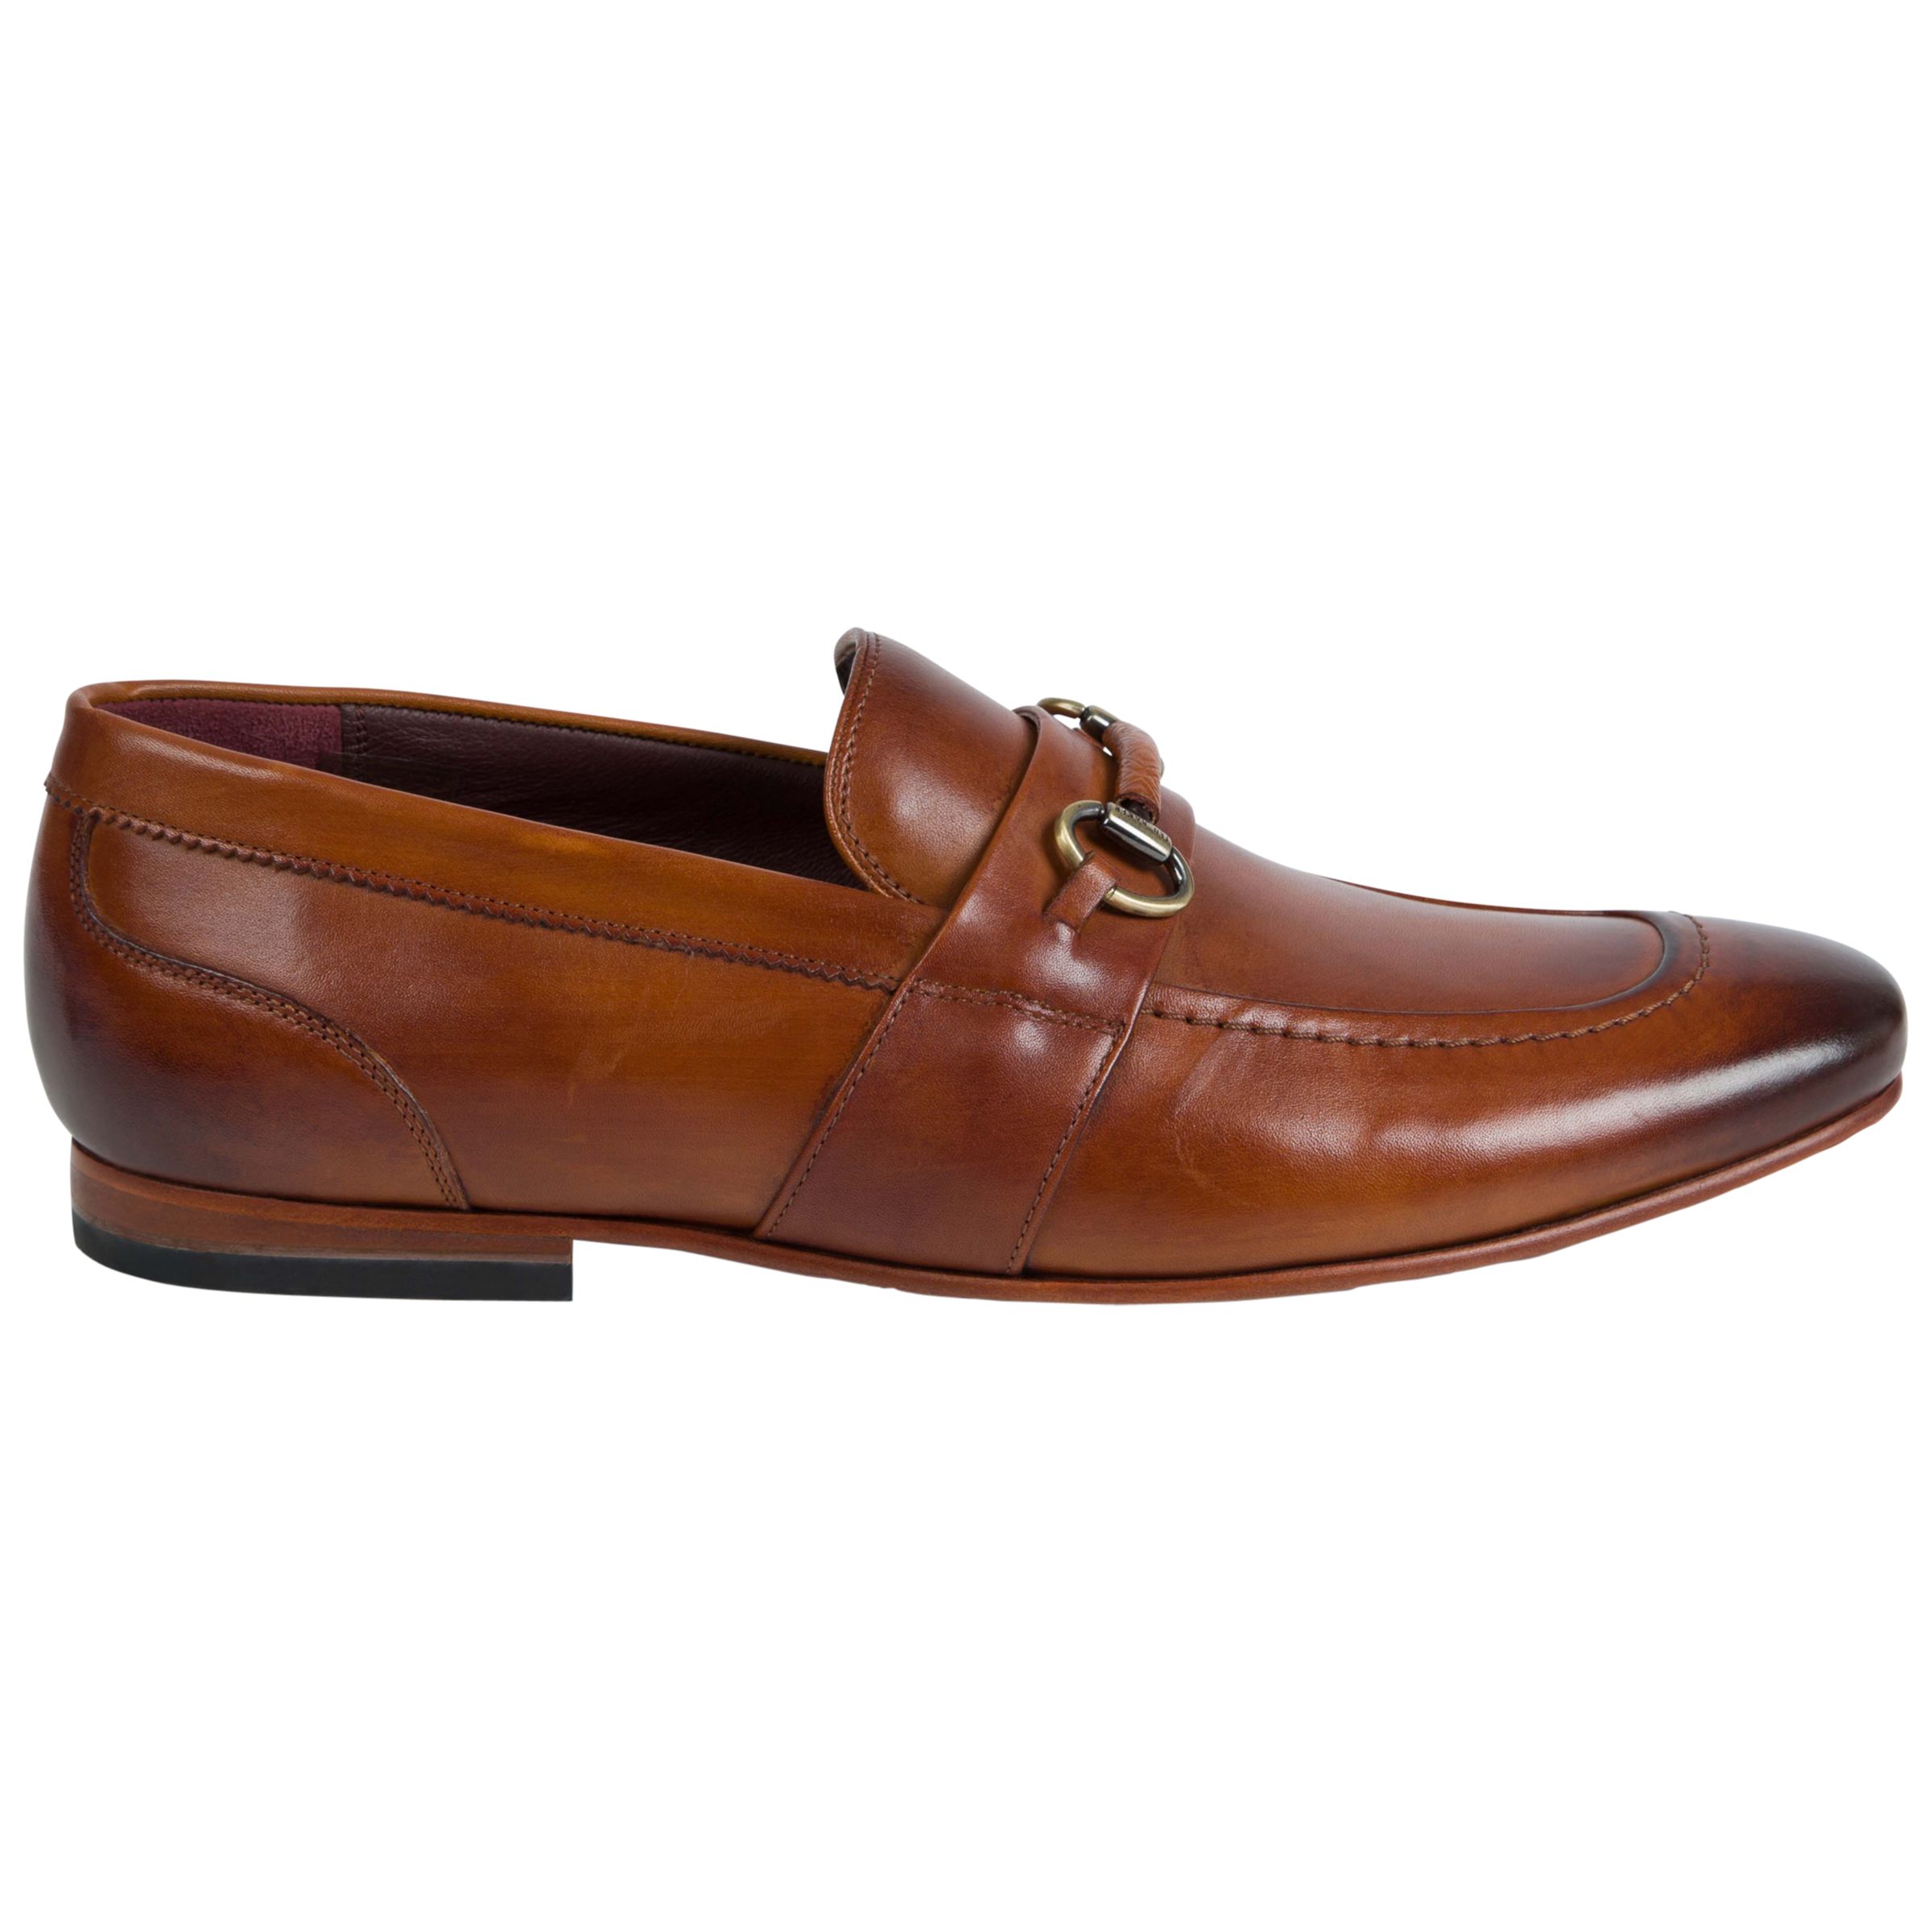 Ted Baker Daiser Loafers at John Lewis & Partners